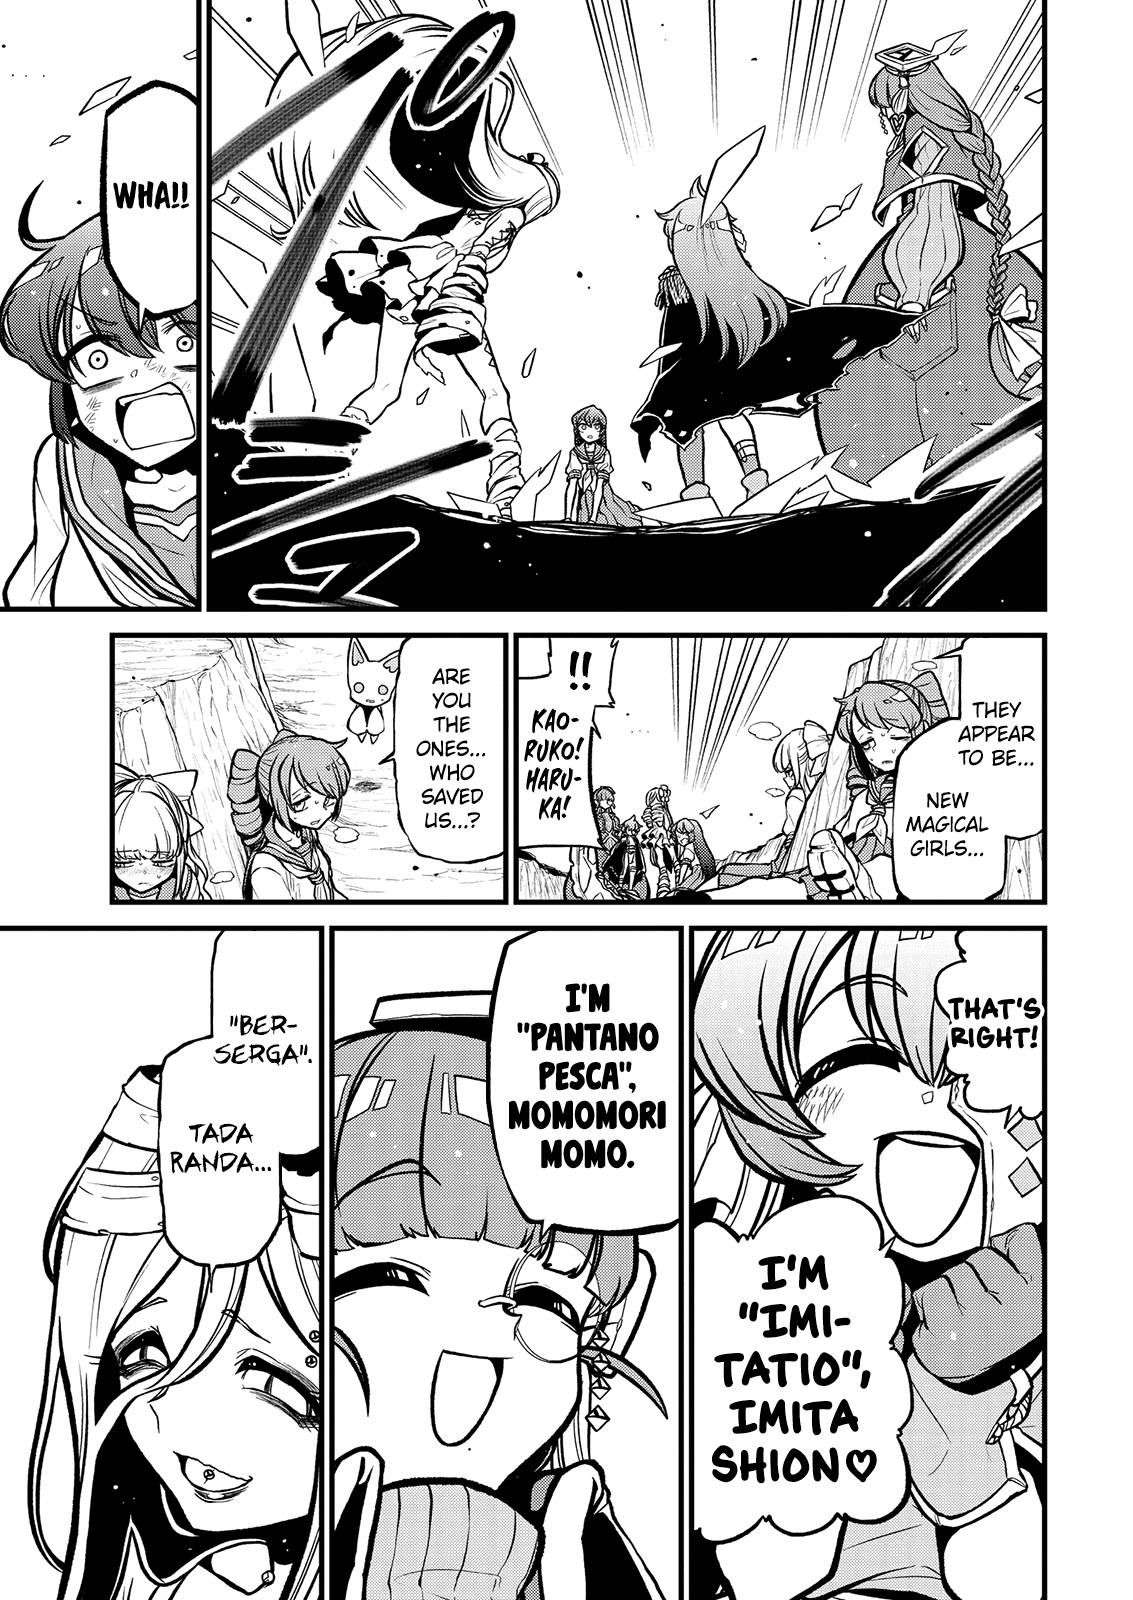 Gushing over Magical Girls - chapter 36 - #5